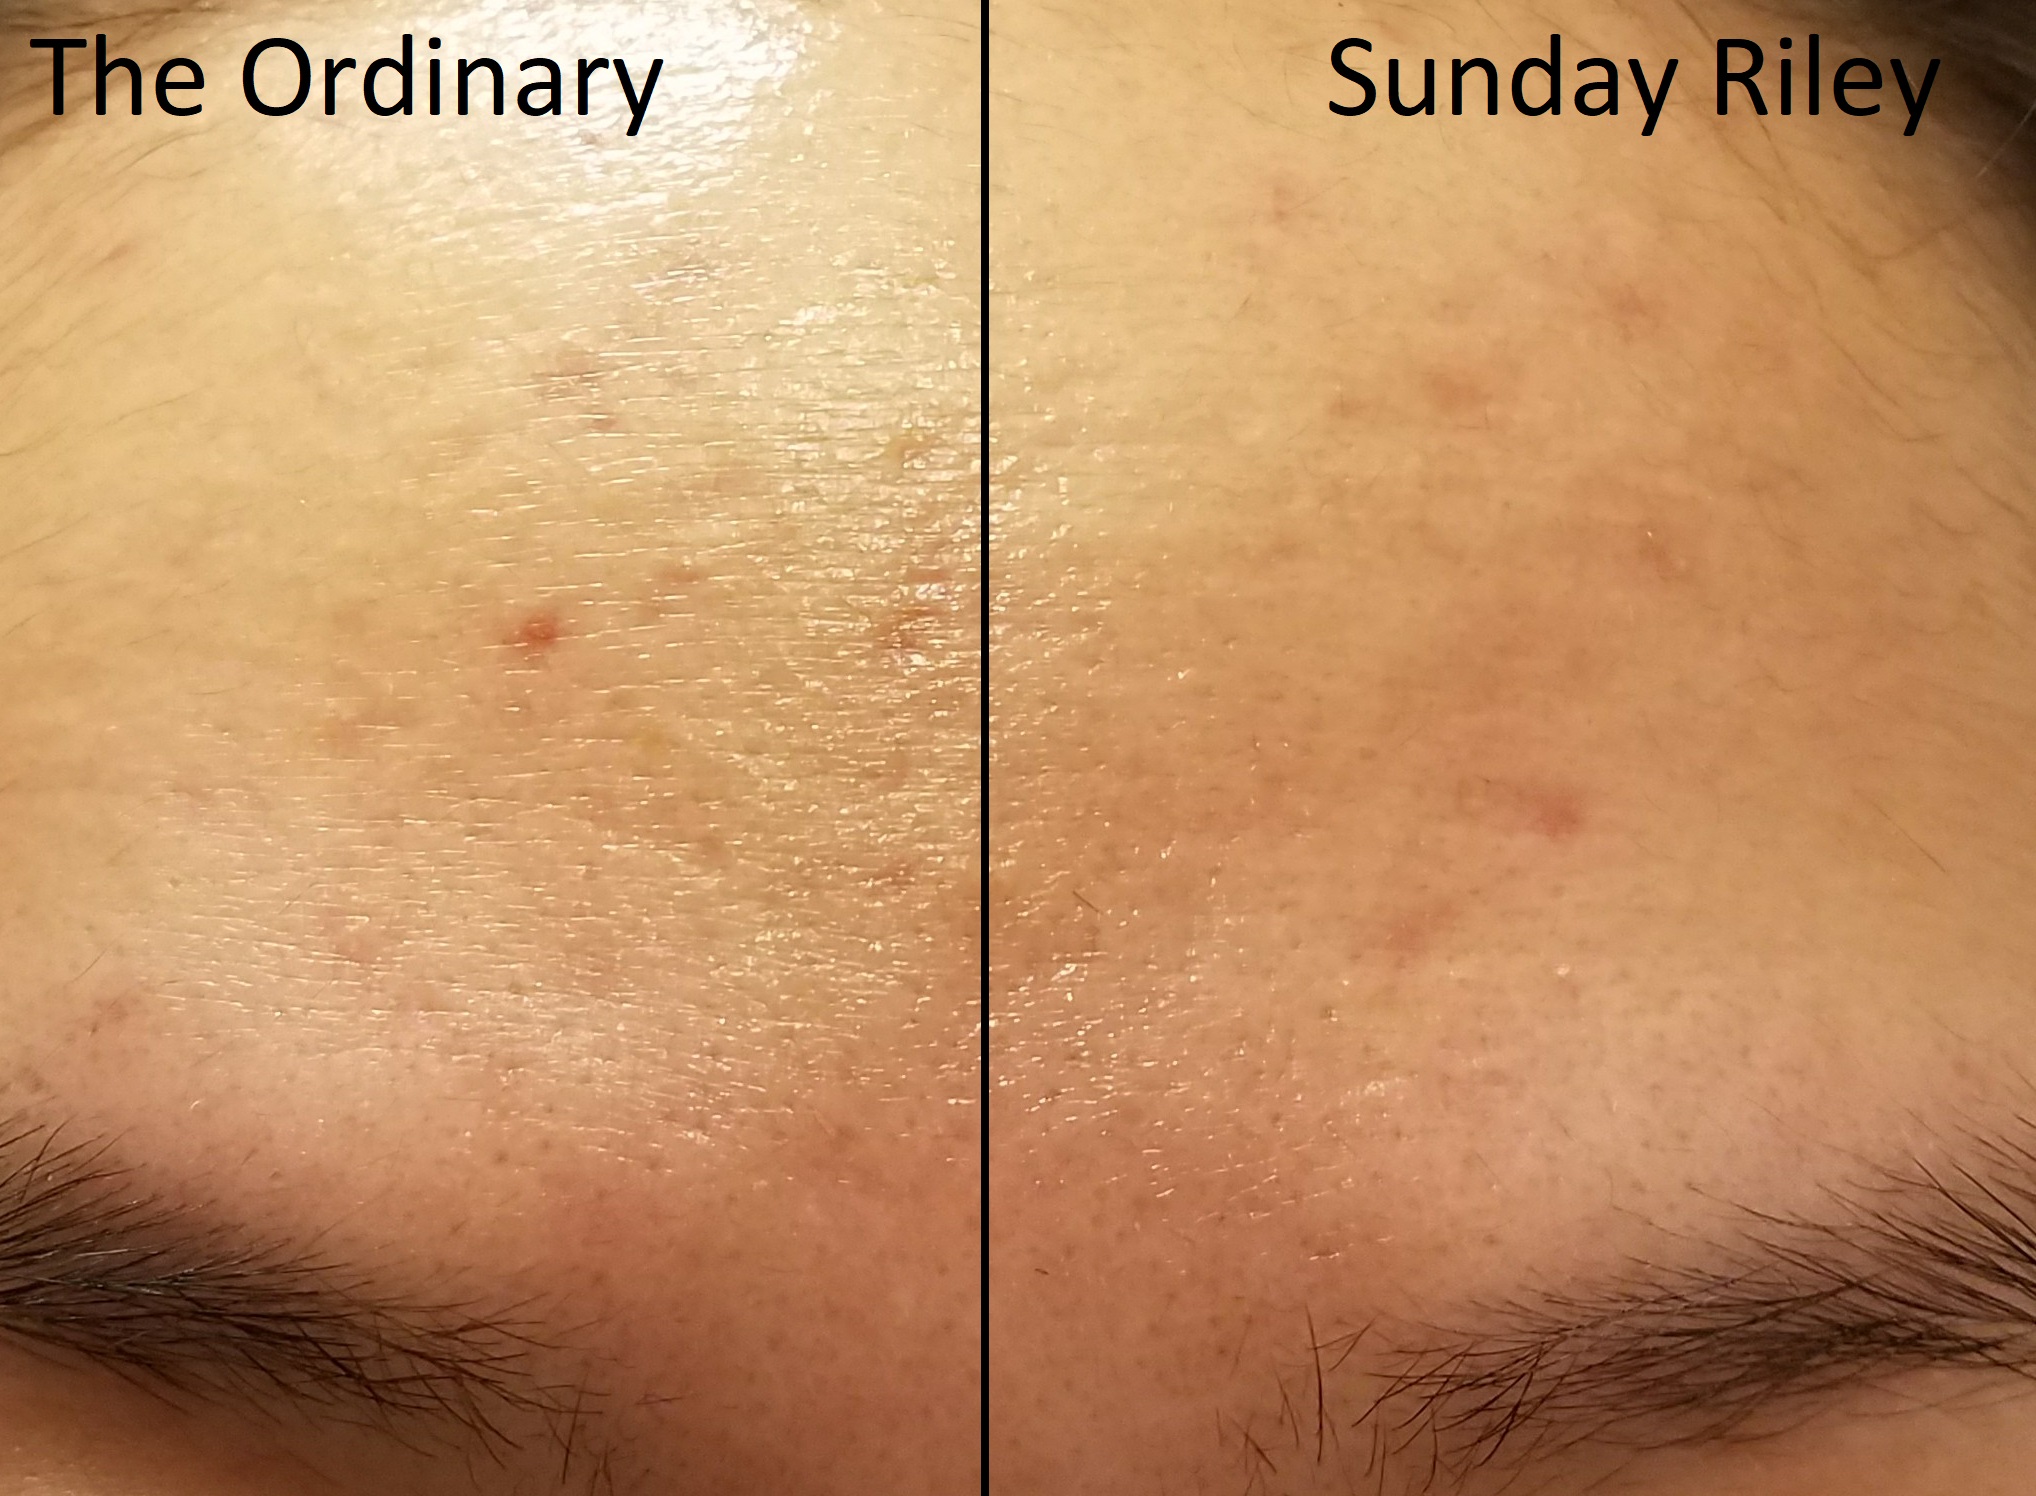 Sunday Riley “Good Genes” on Acne Scars & Fine Lines. Before AND Afters ...2036 x 1496